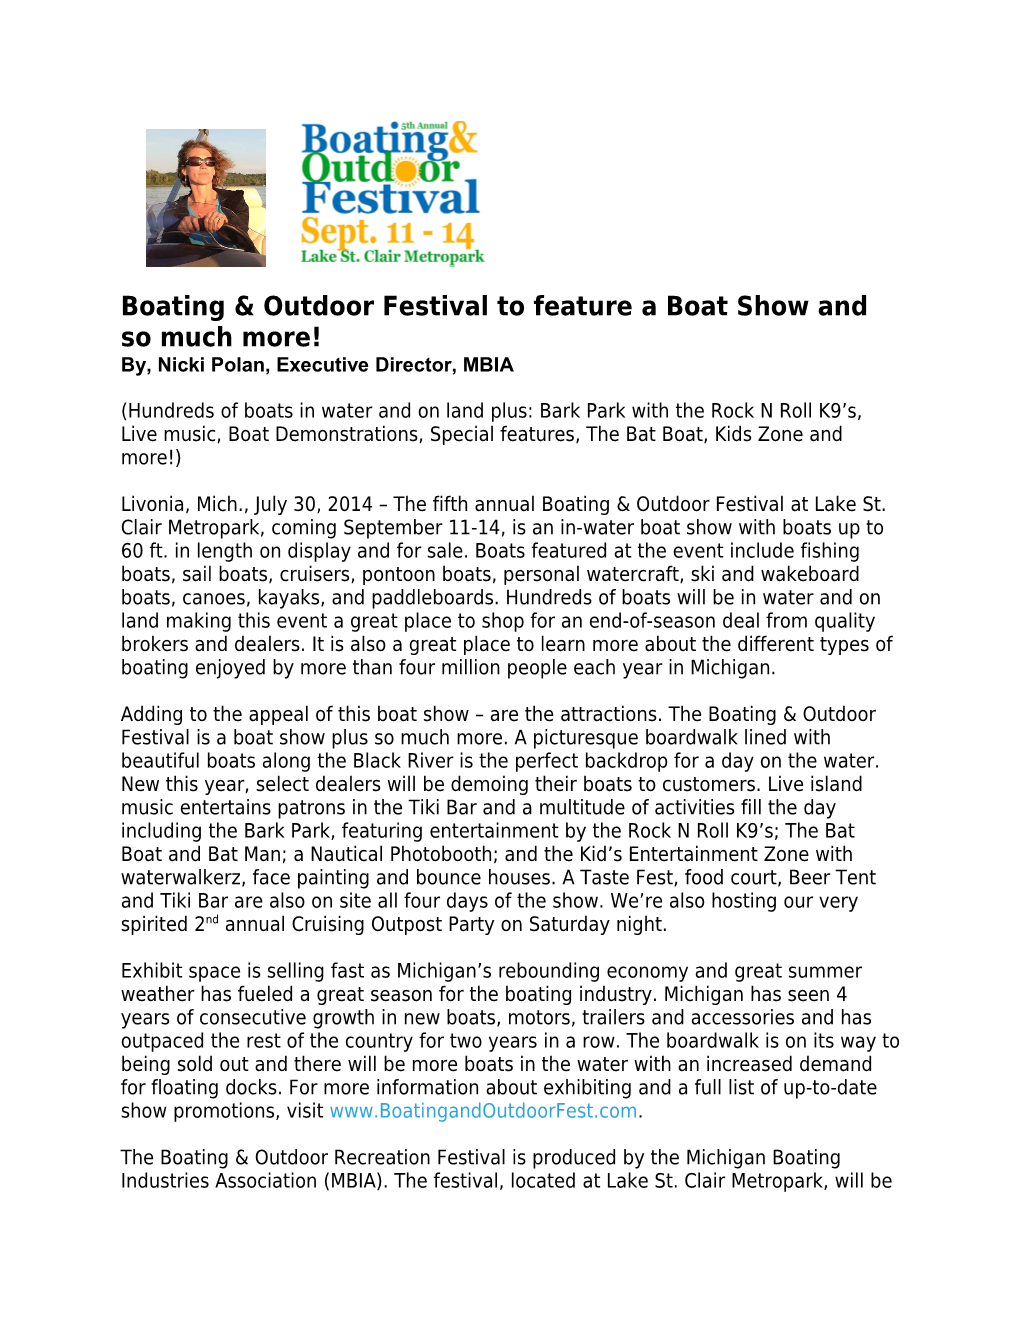 Boating & Outdoor Festival to Feature a Boat Show and So Much More! By, Nicki Polan, Executive